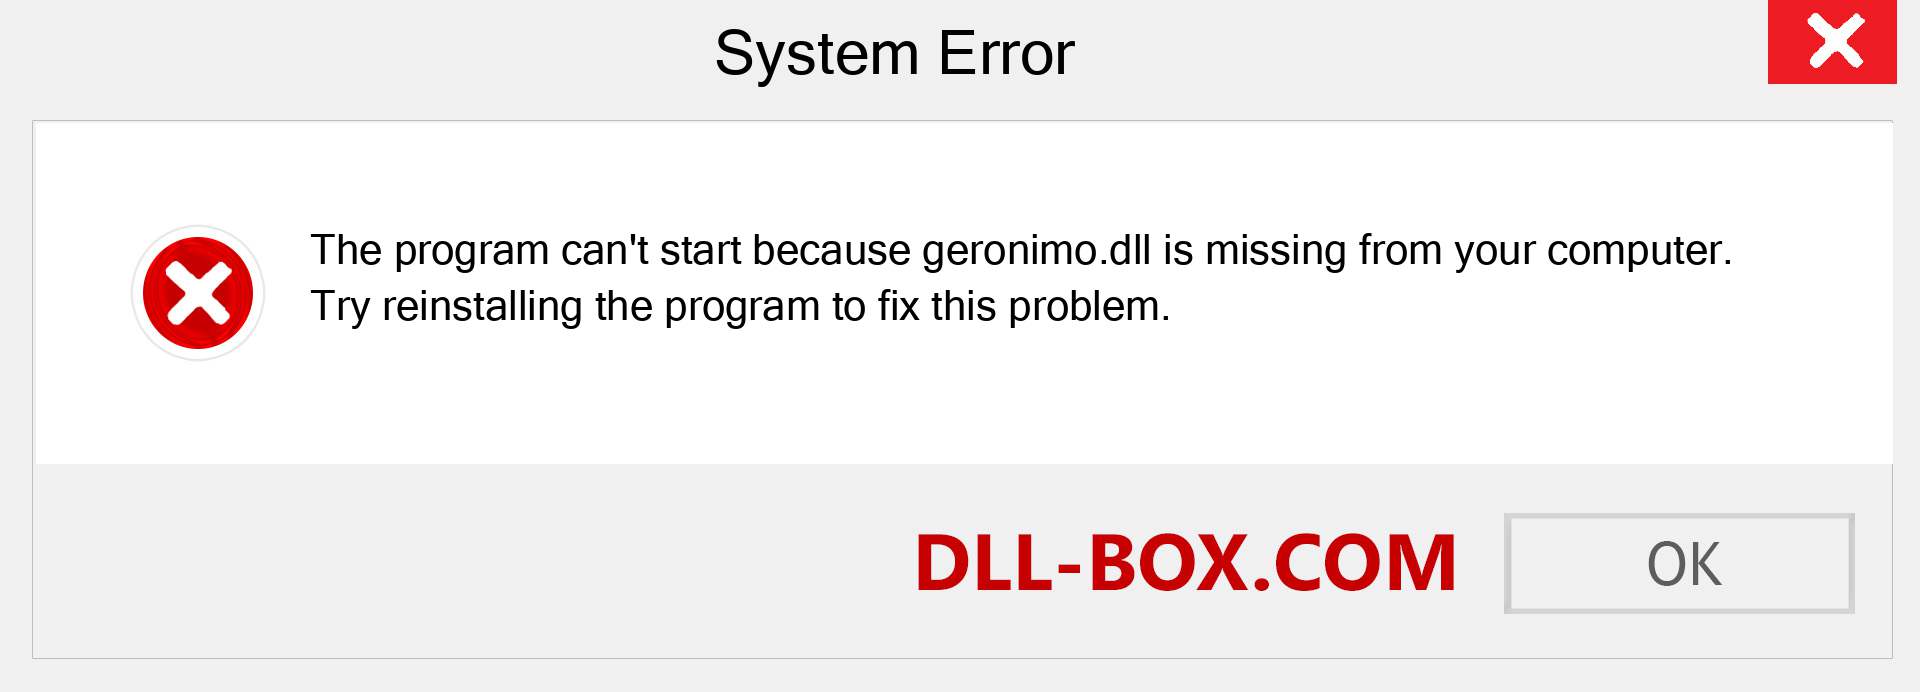  geronimo.dll file is missing?. Download for Windows 7, 8, 10 - Fix  geronimo dll Missing Error on Windows, photos, images